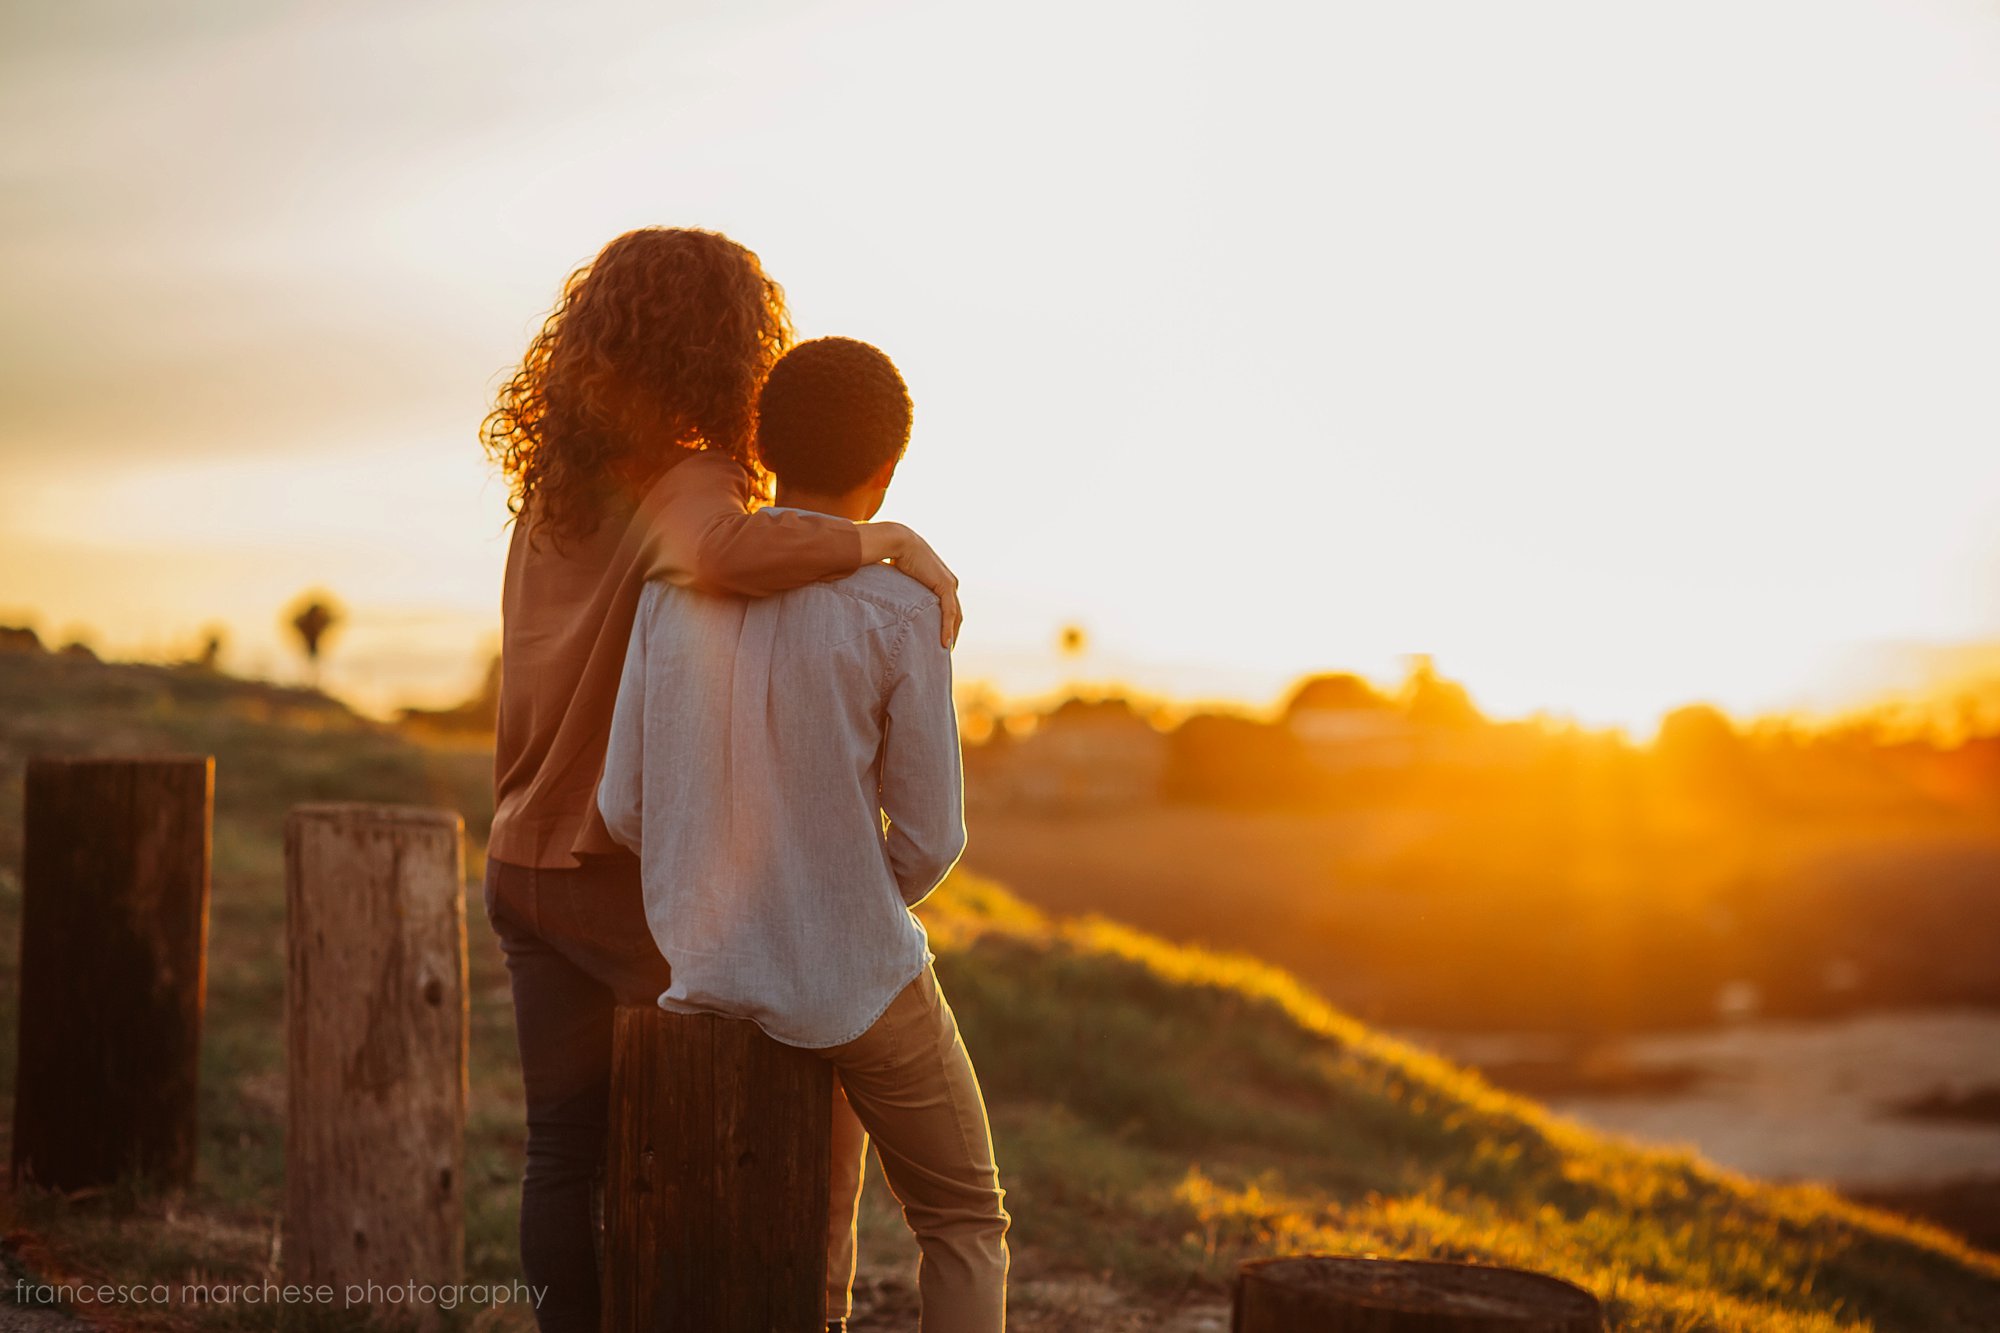 Francesca Marchese Photography motherhood photography session mother and son sunset